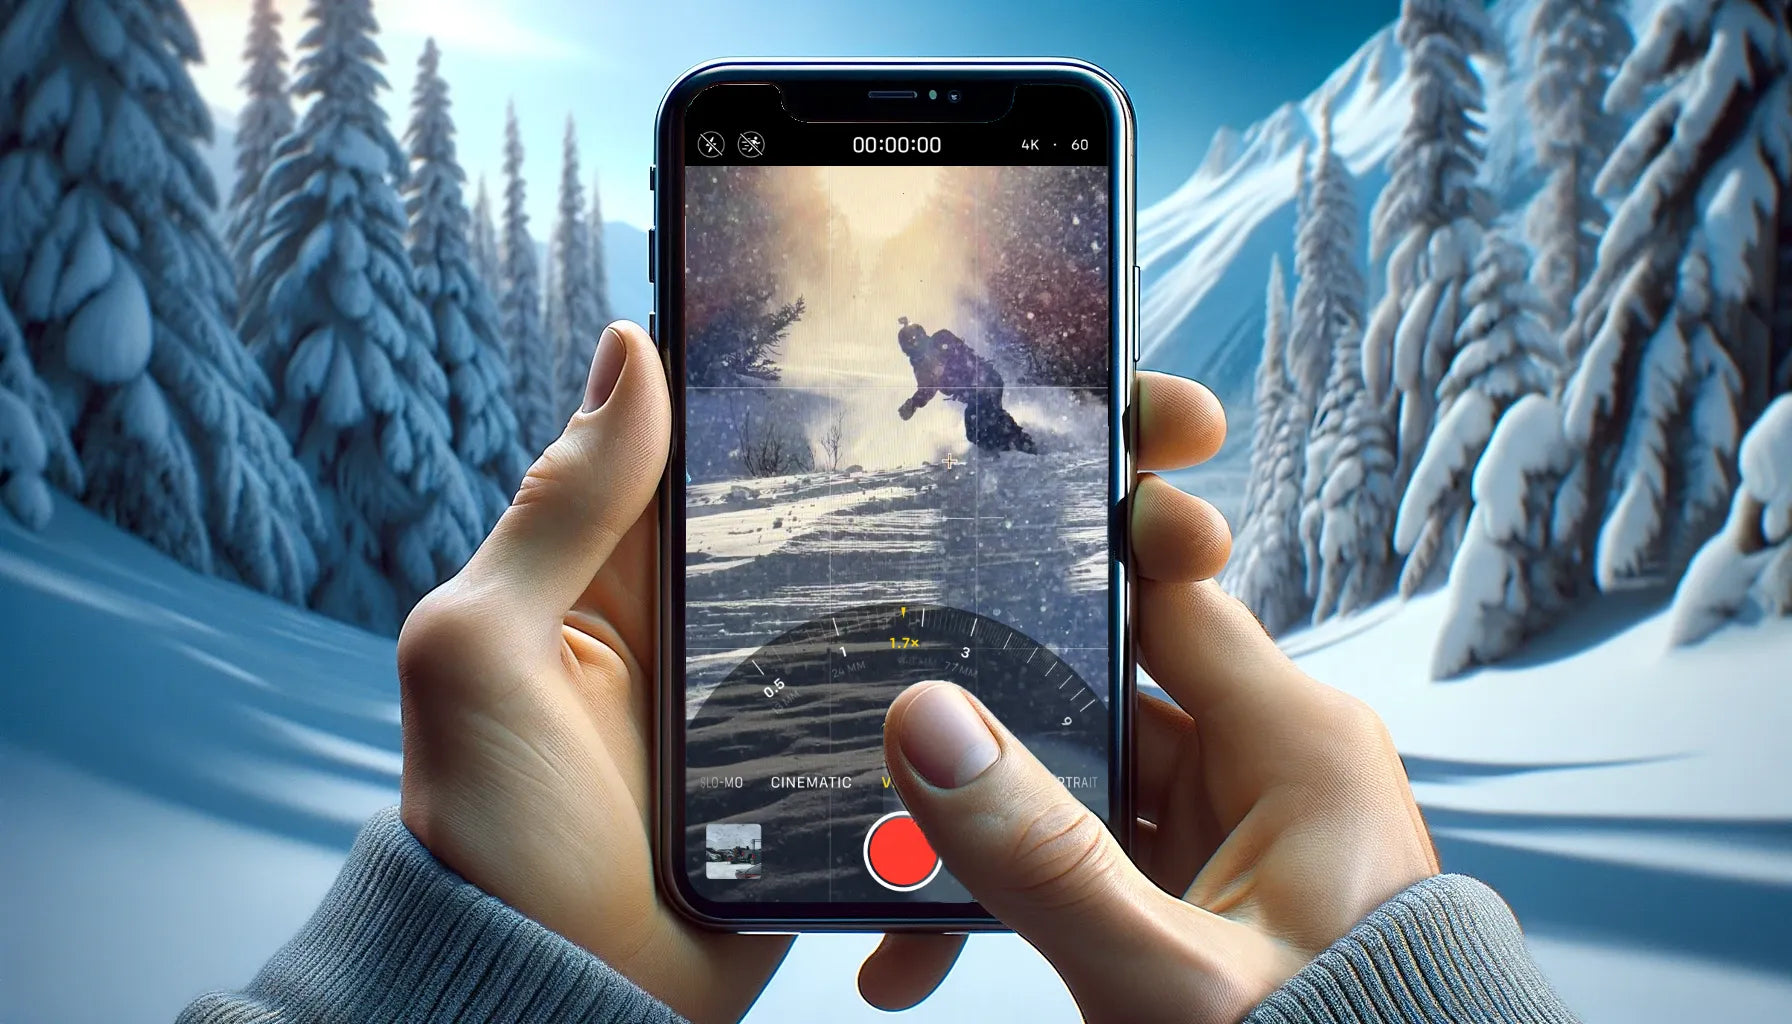 Tips and Tricks to filming snowboarding with an iPhone